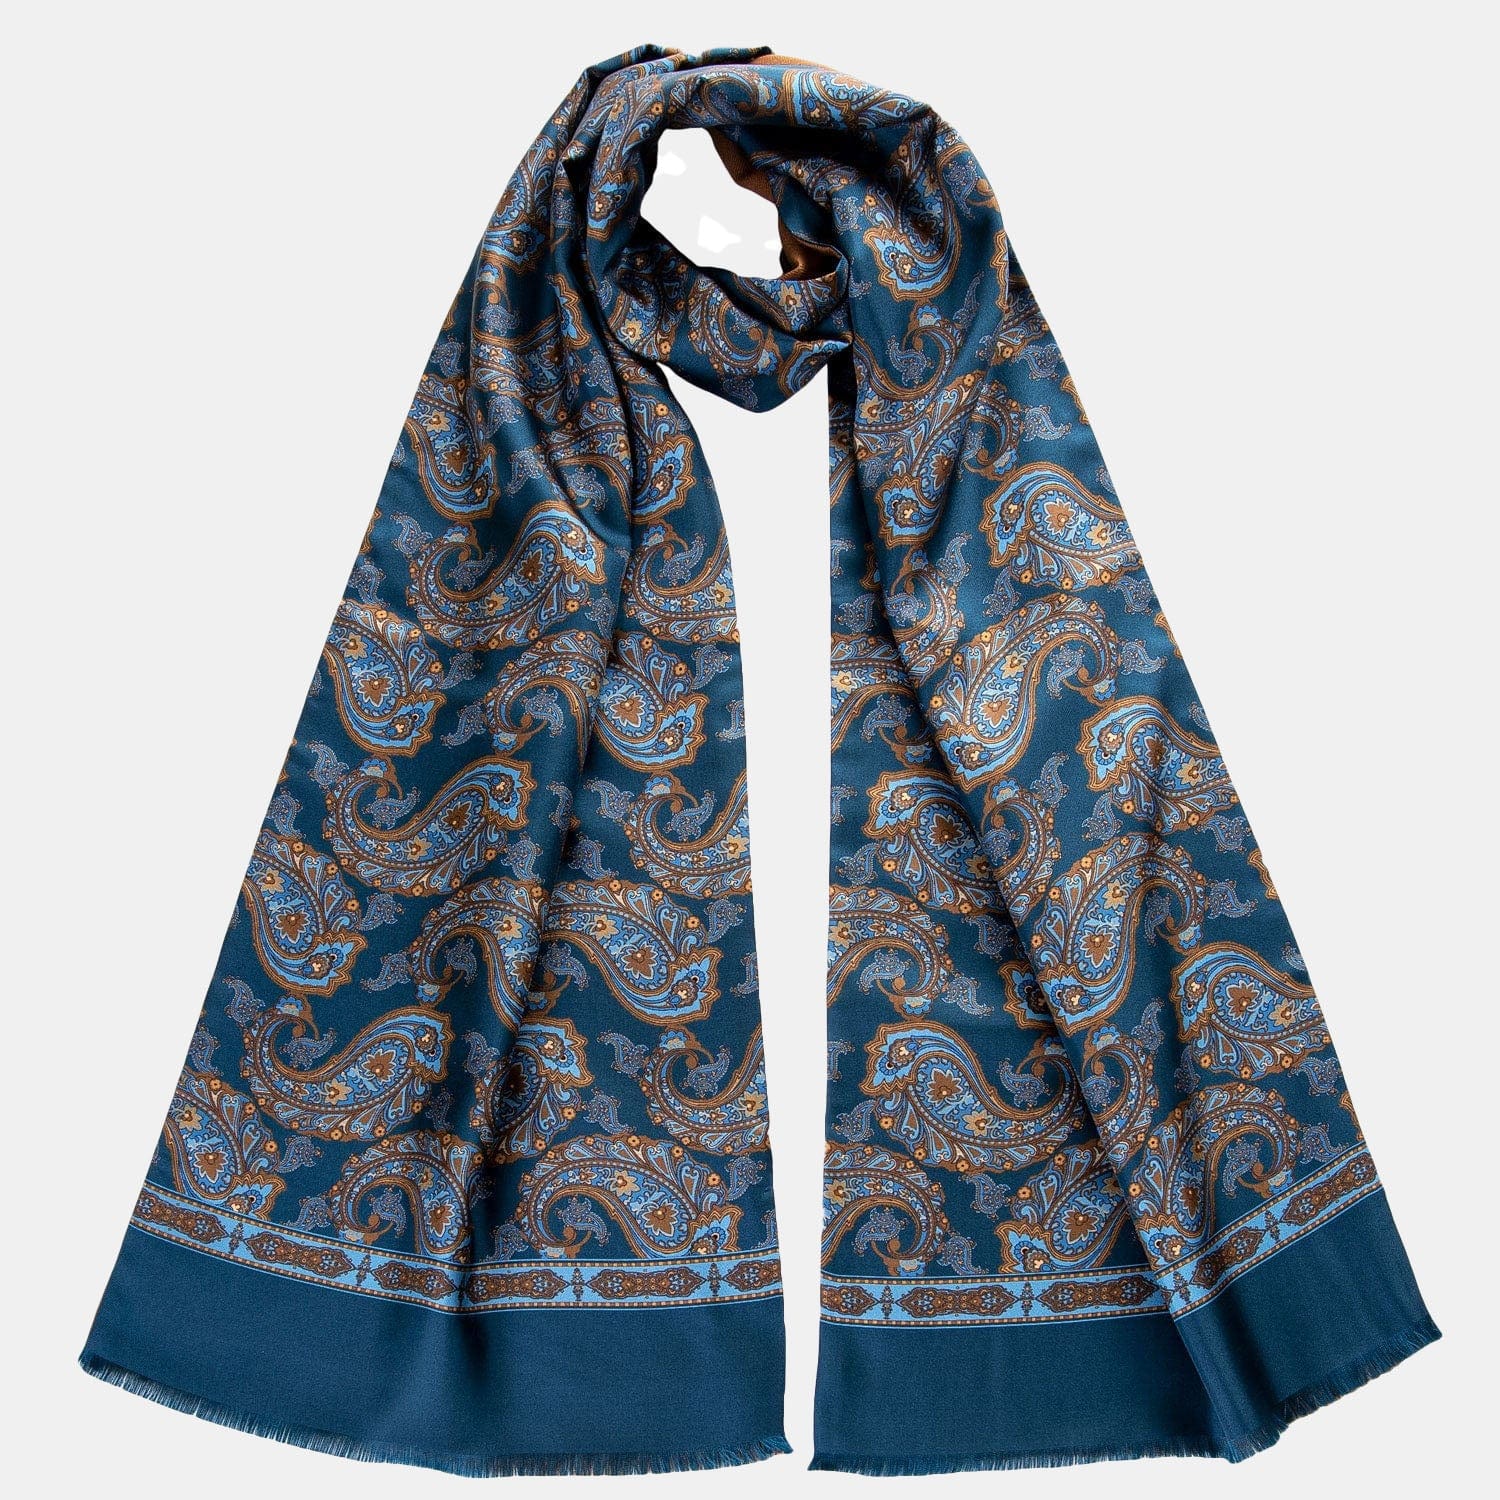 Italian Wool Reversible Scarf - Paisley to Chevron in Navy, Grey, and